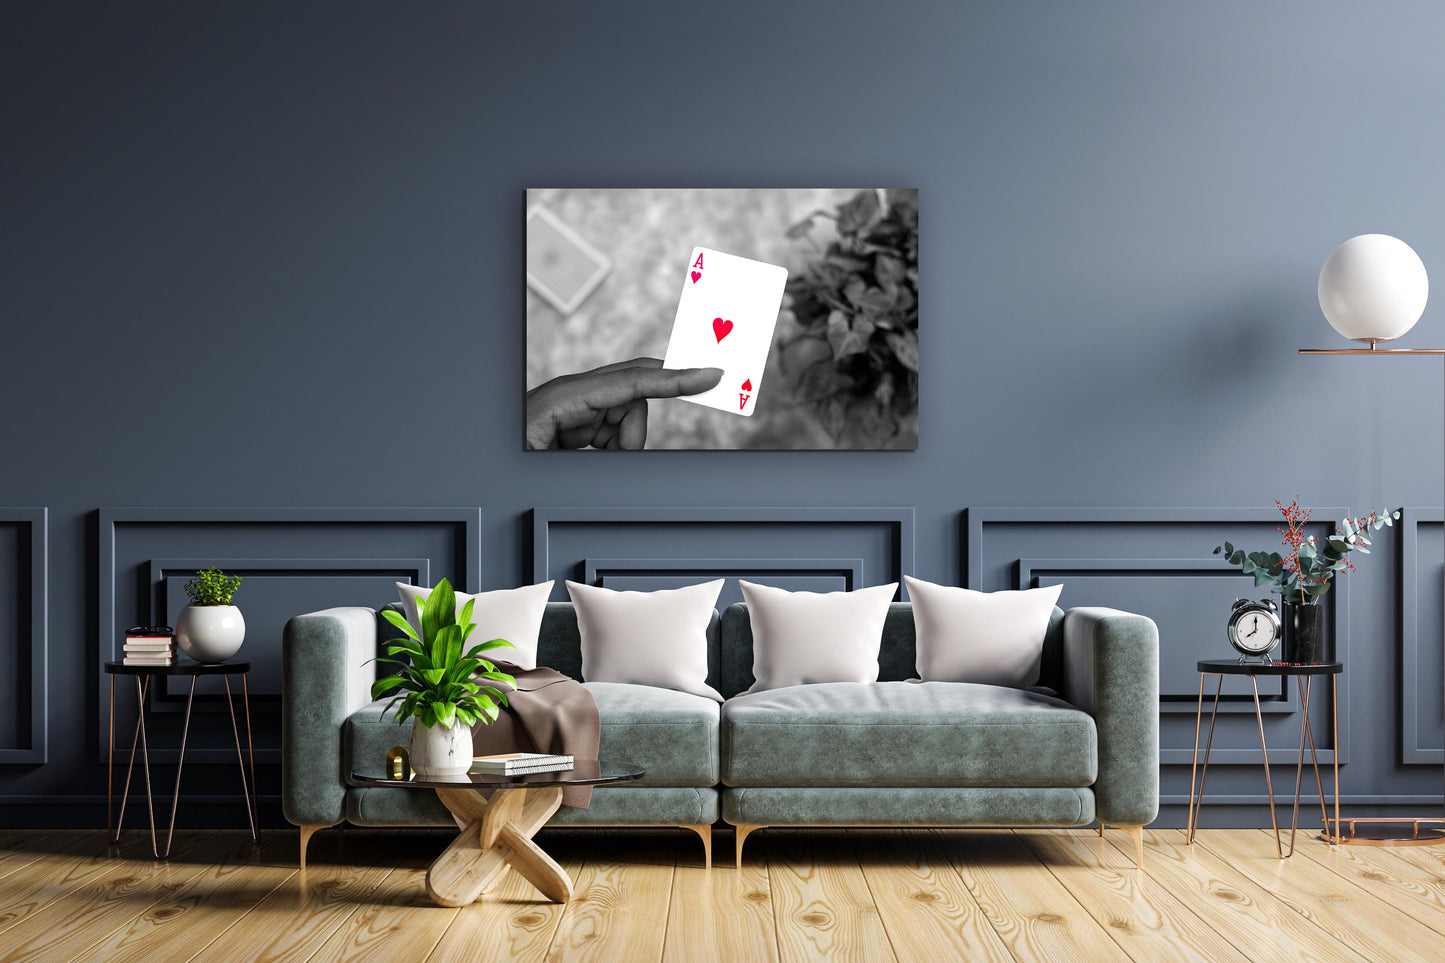 Ace of hearts photo prints